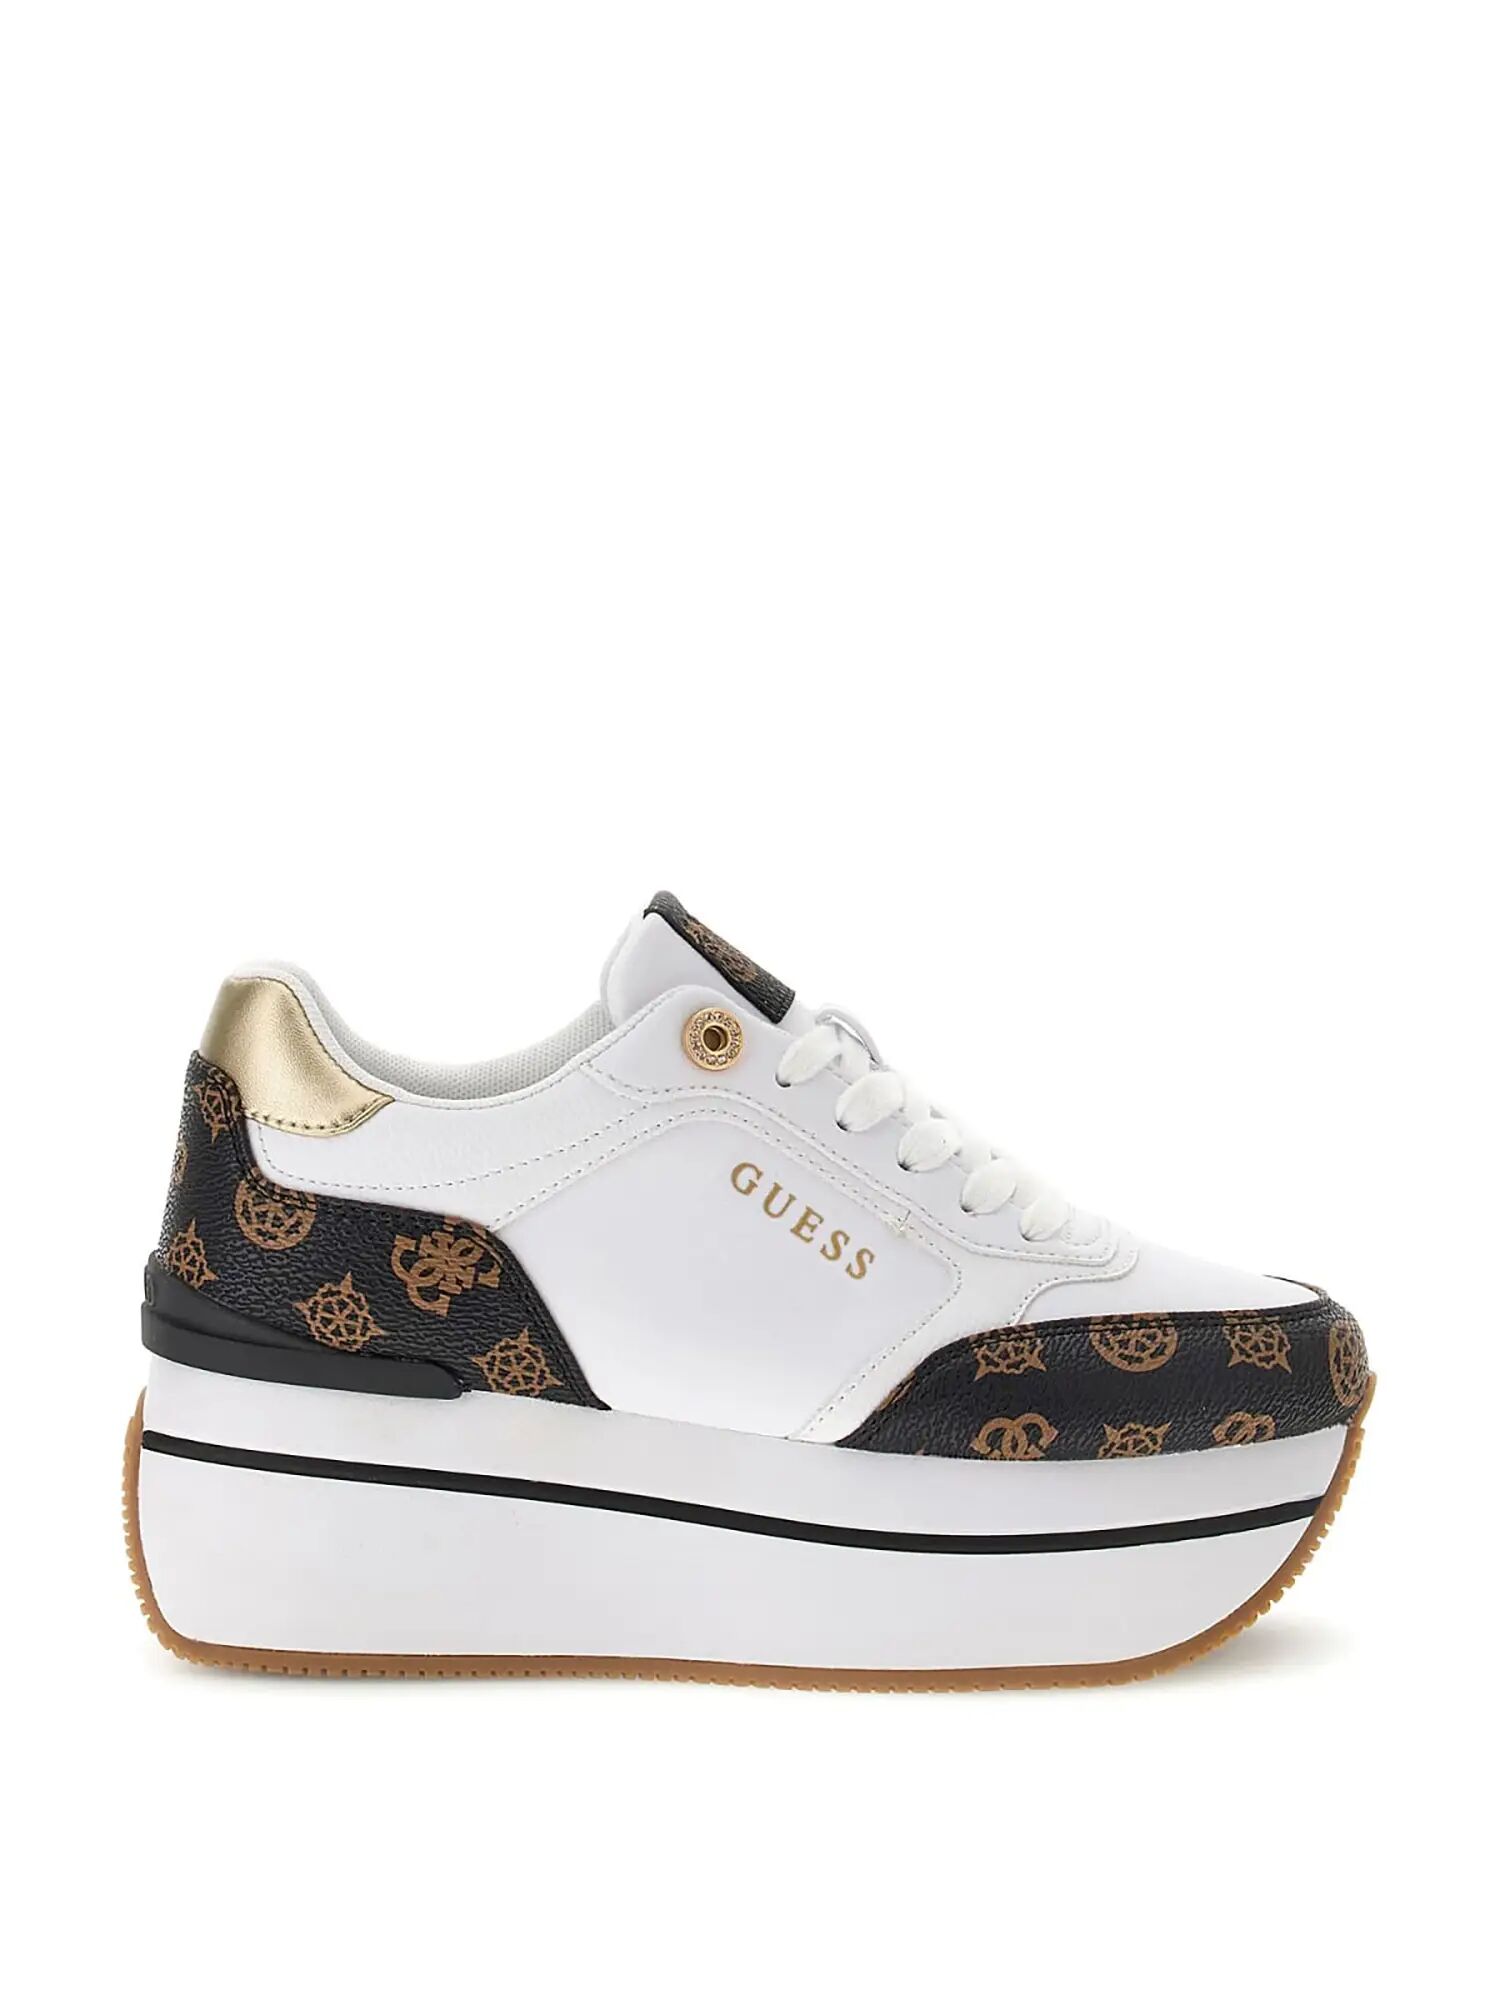 Guess Sneakers Bianche Donna BIANCO/MARRONE 35